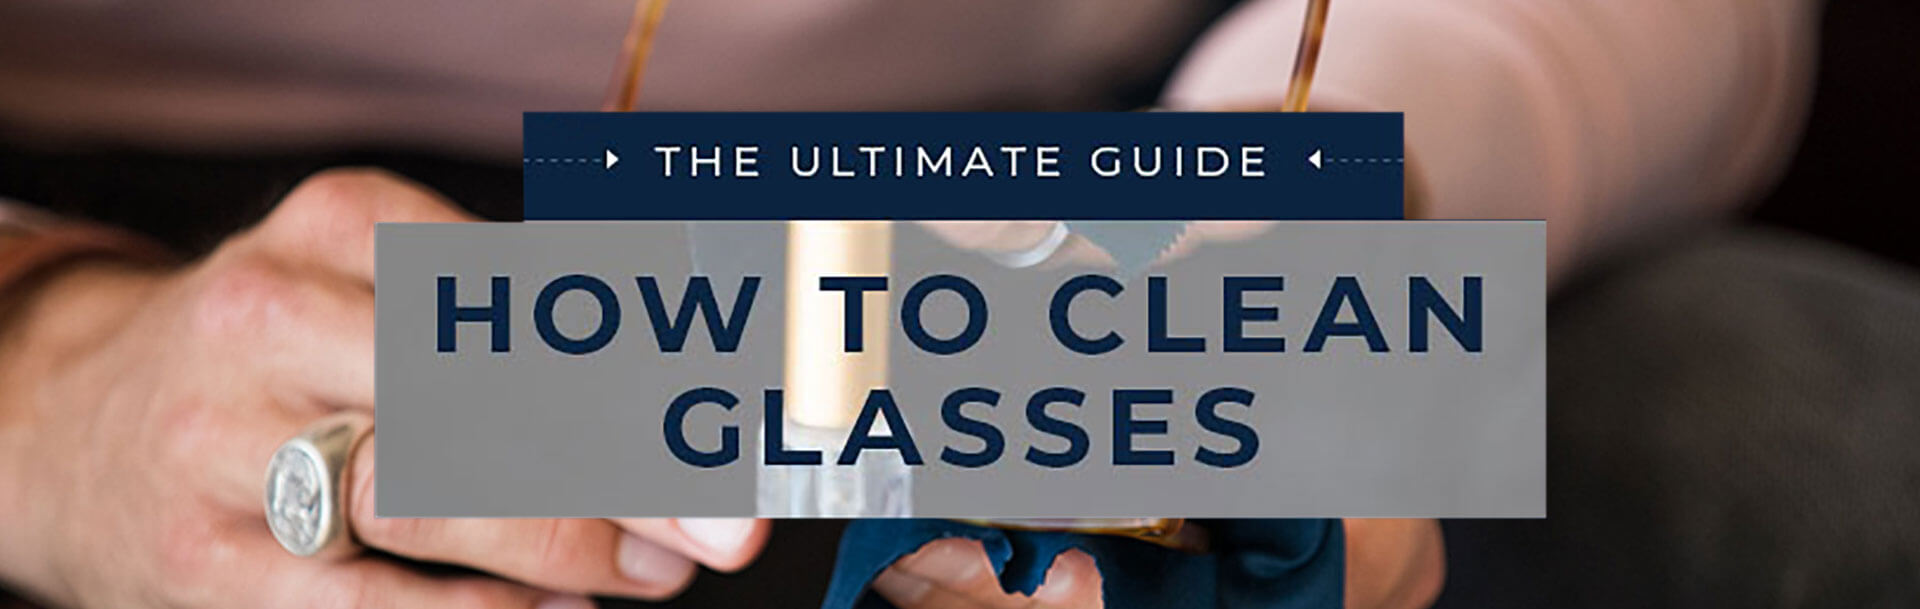 Man cleaning glasses under text "How to Clean Glasses"